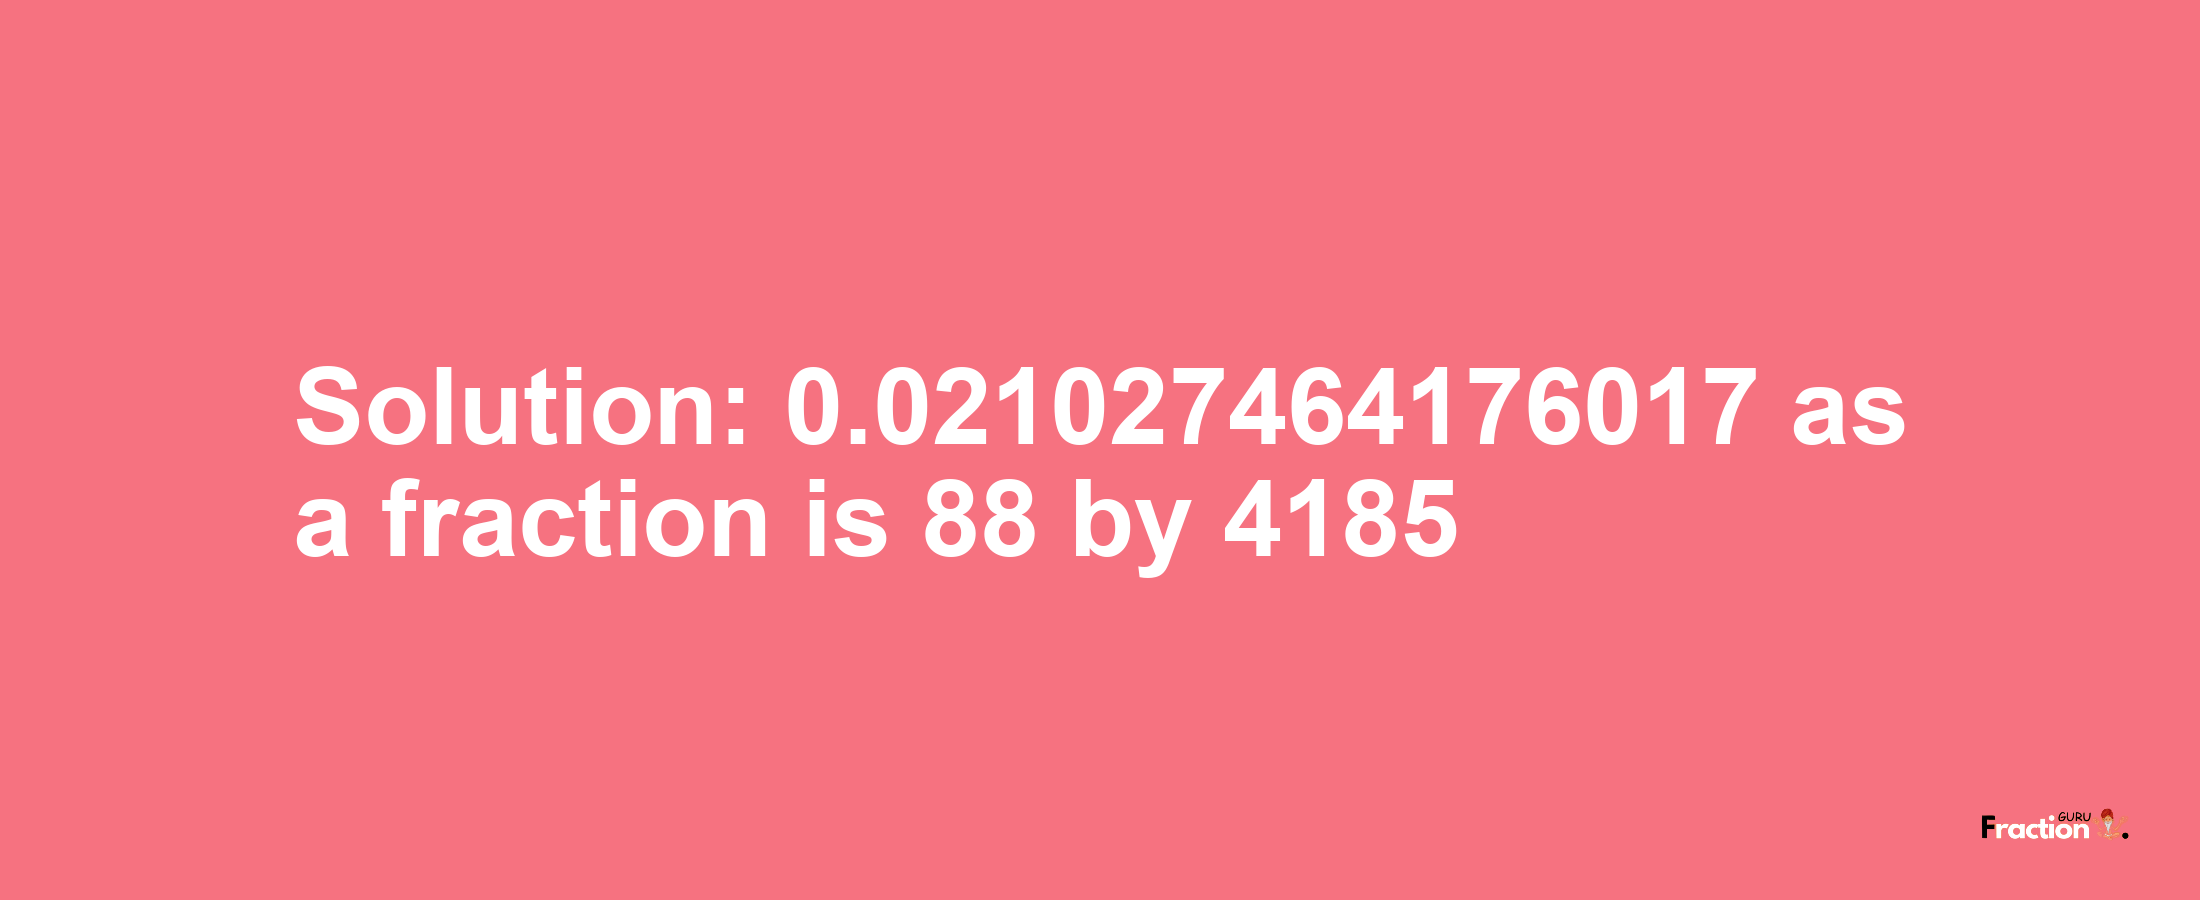 Solution:0.021027464176017 as a fraction is 88/4185